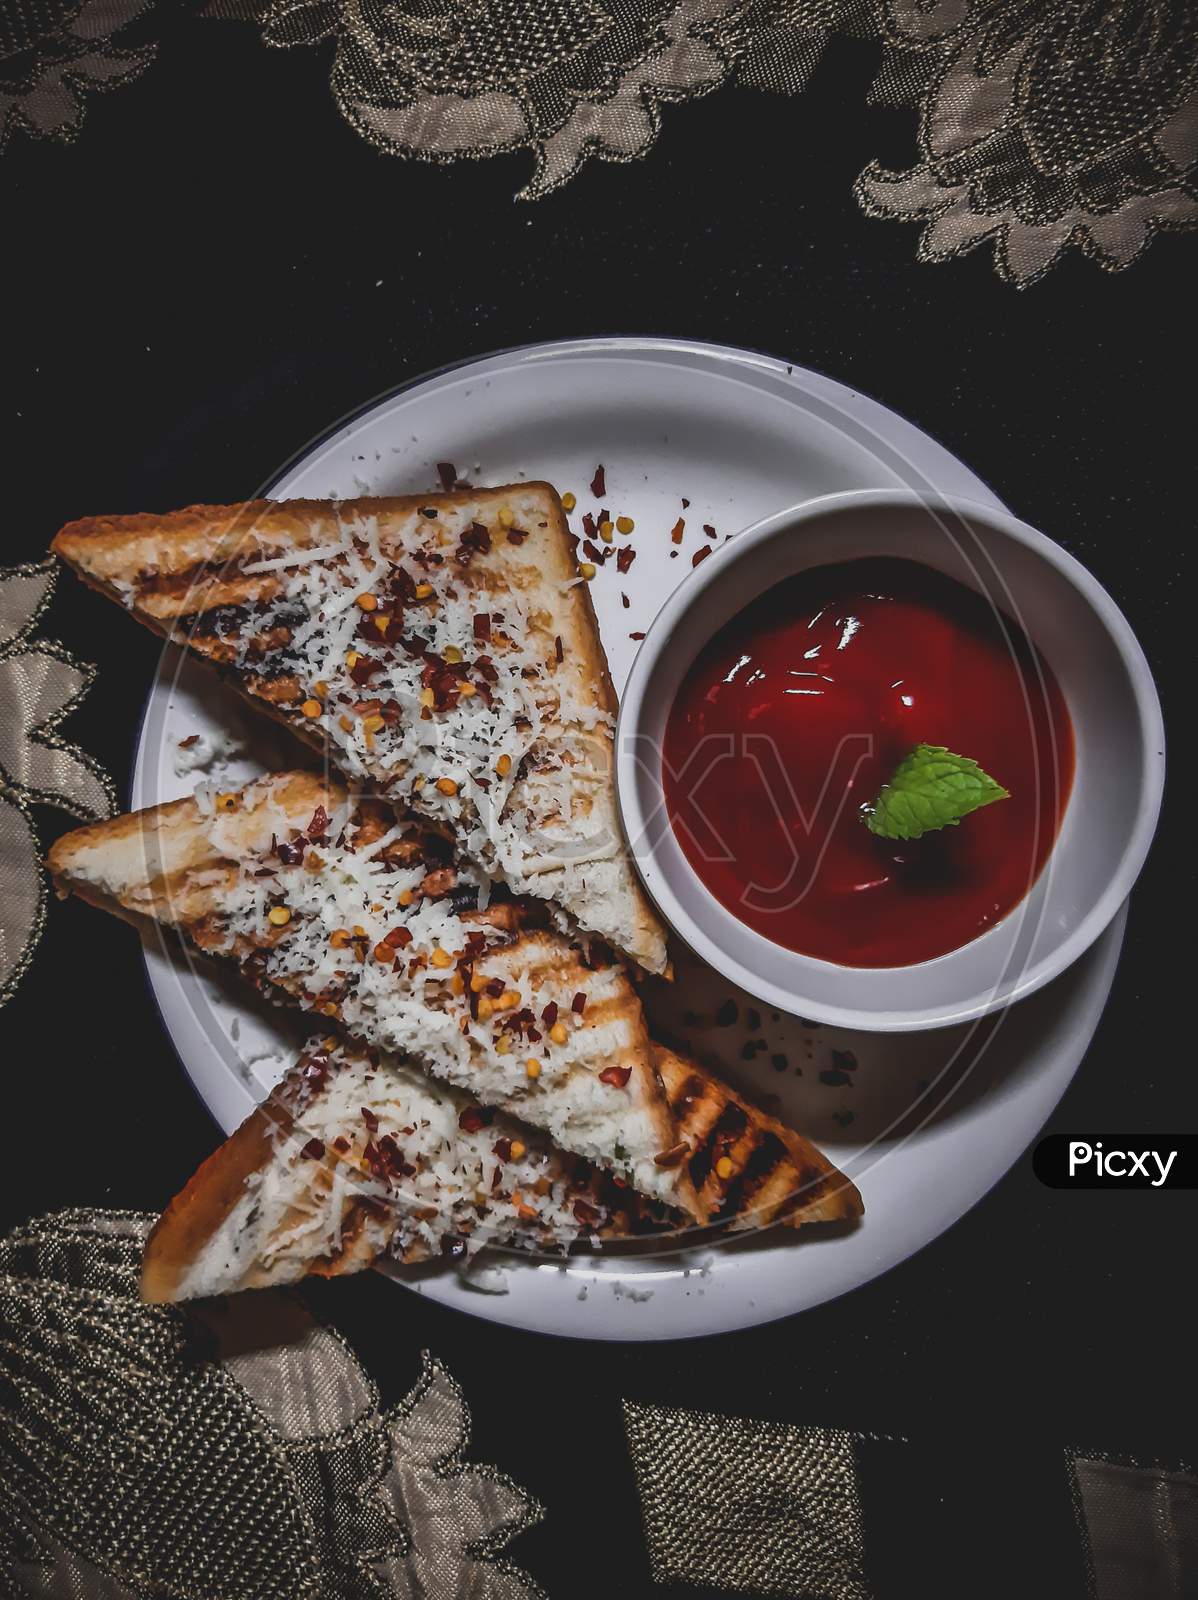 Veg sandwich with tamato sauce. Indian food style food-photography.